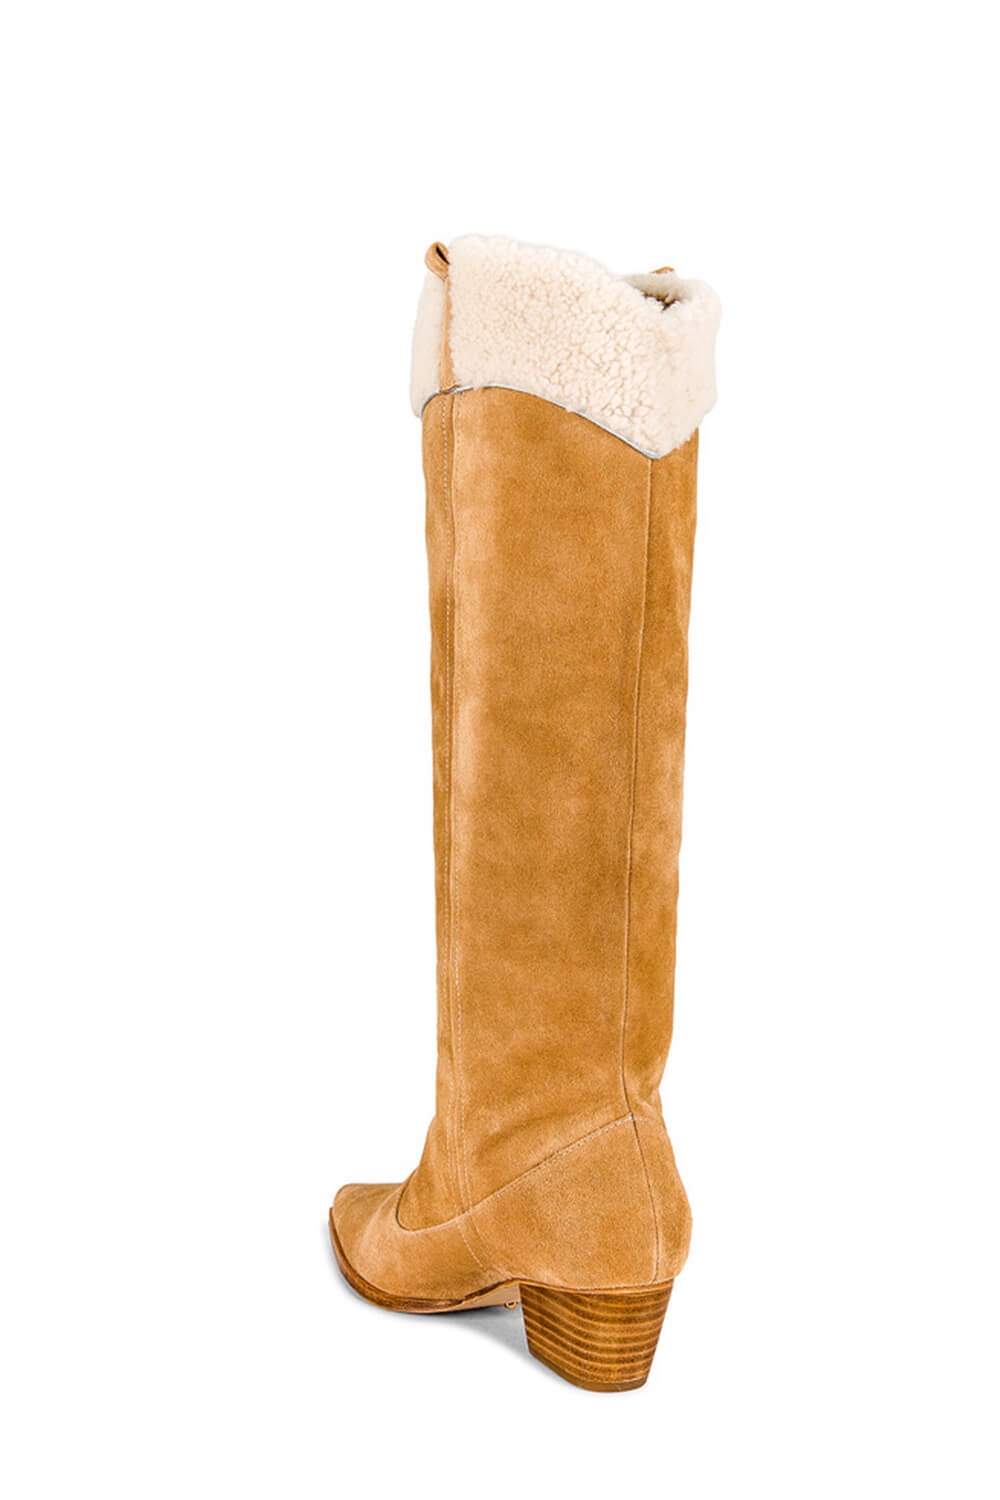 Suede Pointed Toe Western Cowboy Knee High Boots With Faux Fur Trim - Gold